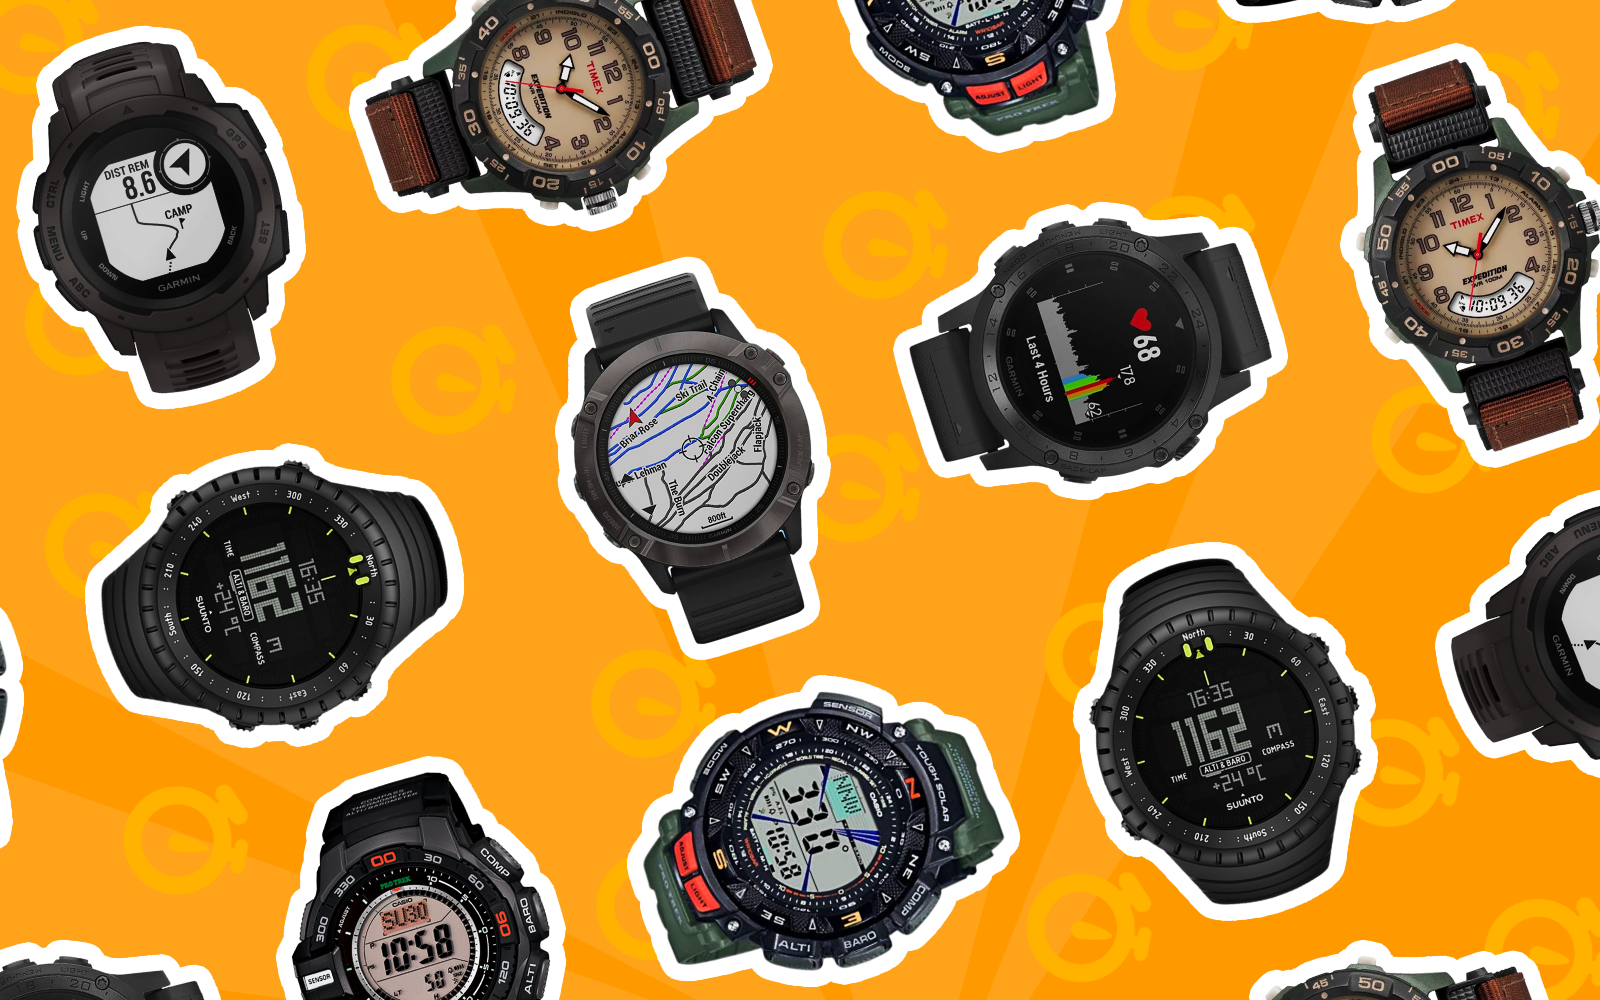 The 7 Best Hiking Watches in 2022